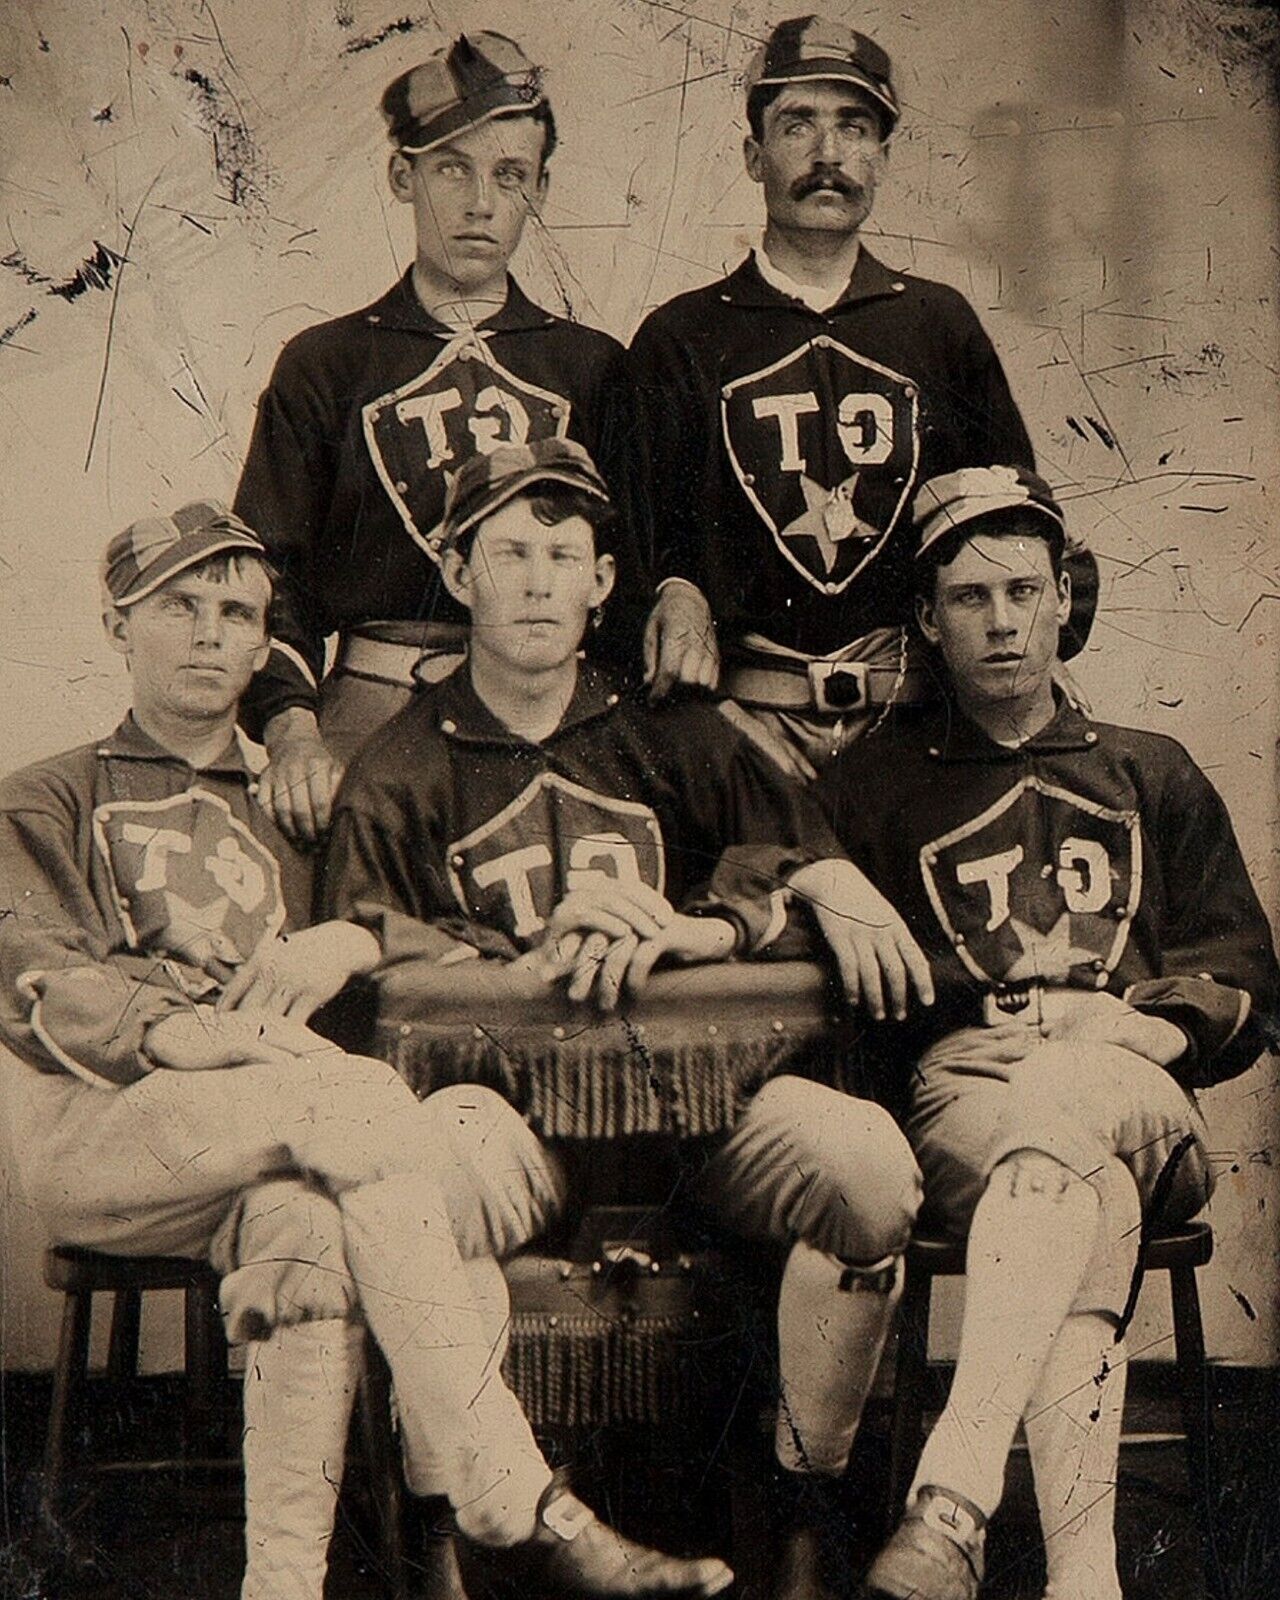 Unknown Baseball Team late 1800s  Vintage old photo 8X10 Rare Find